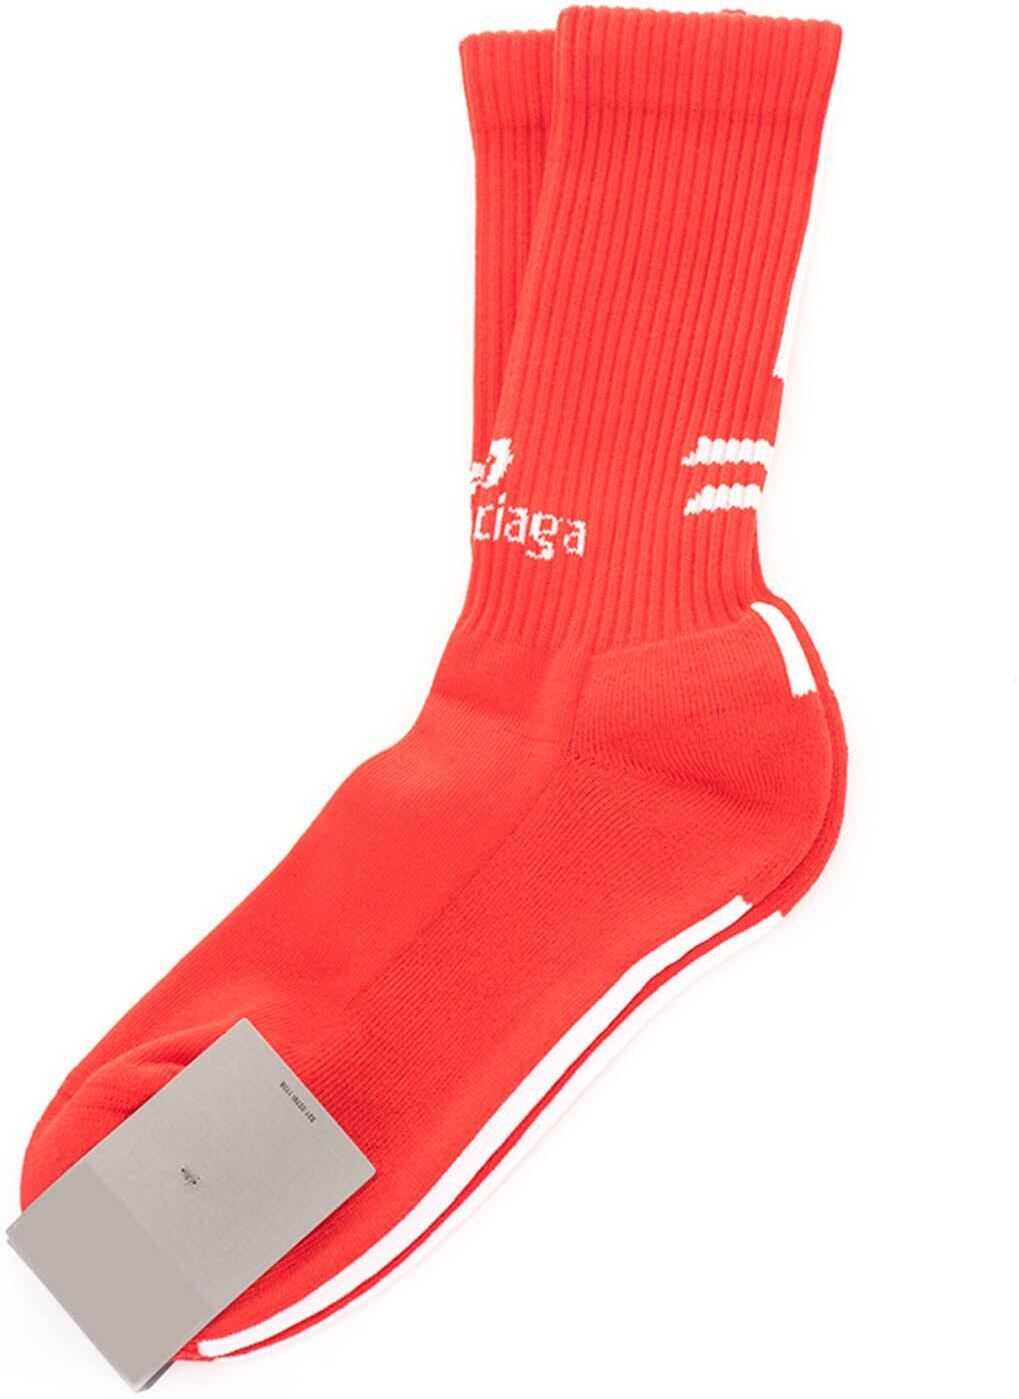 Soccer Socks In Red And White